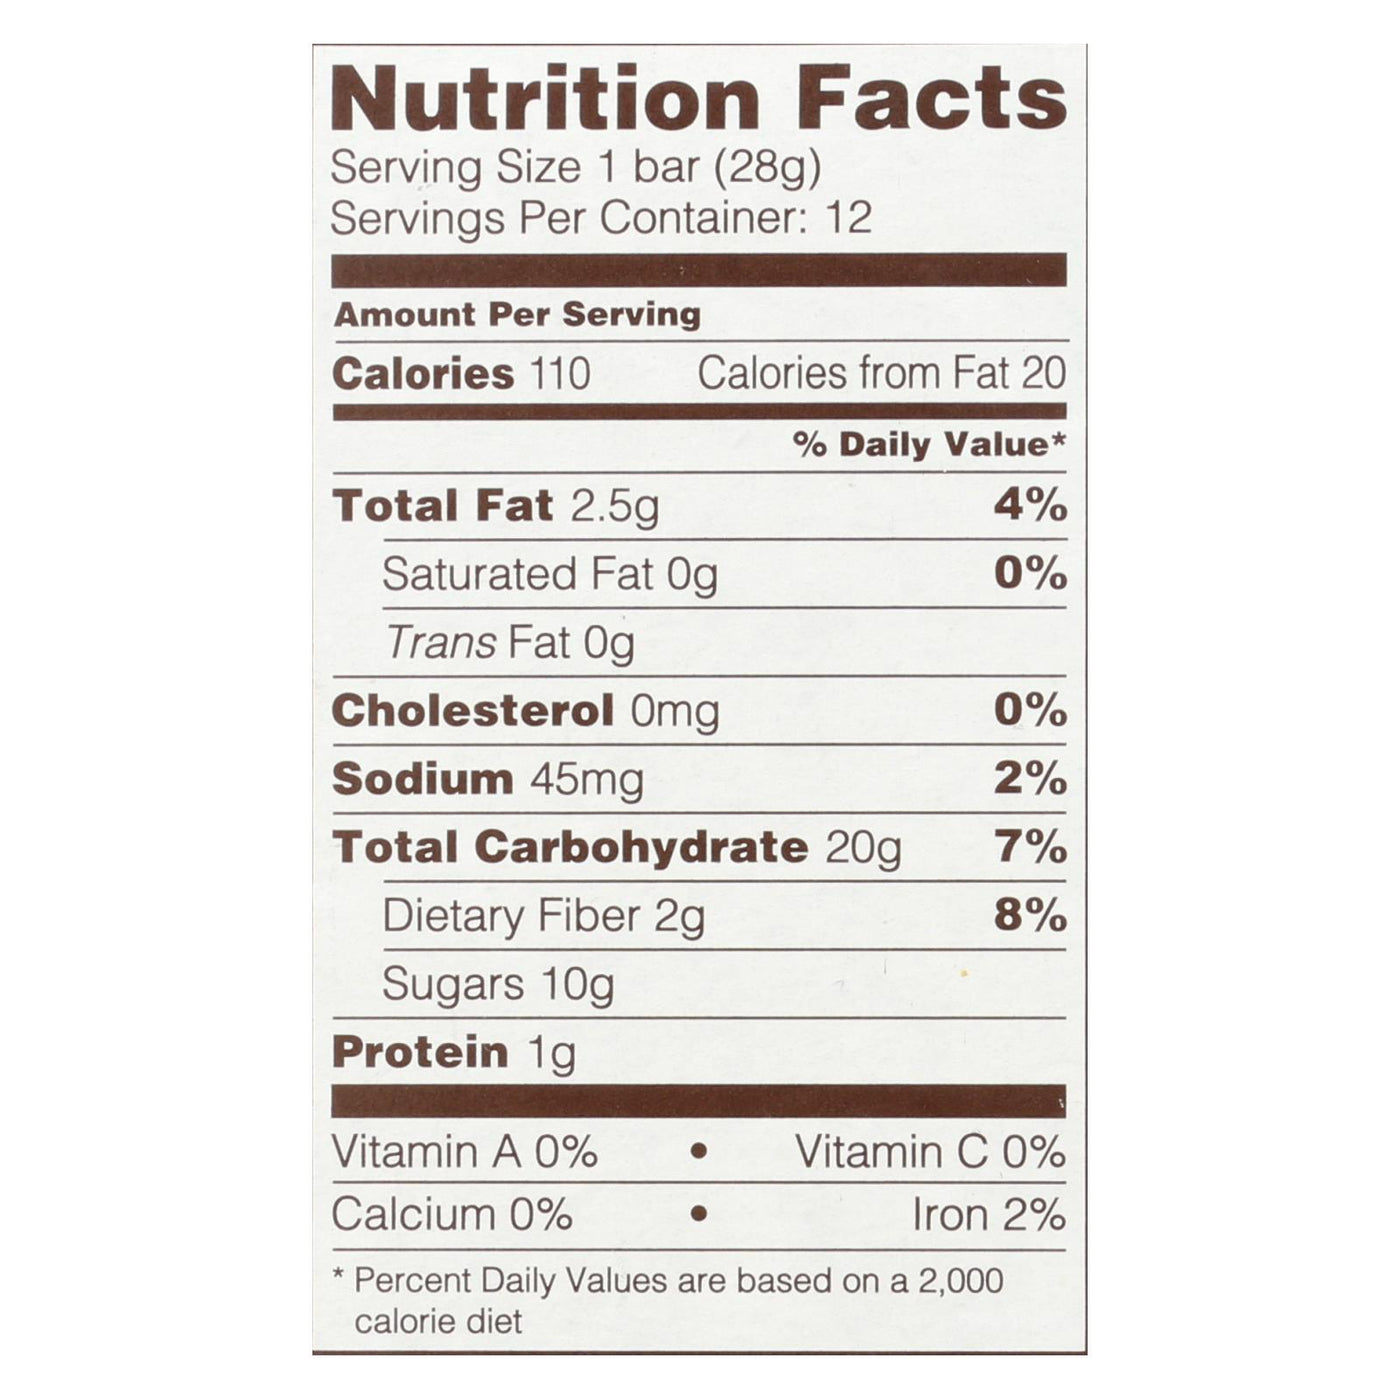 Nature's Bakery Stone Ground Whole Wheat Fig Bar - Peach Apricot - 2 Oz - Case Of 6 | OnlyNaturals.us